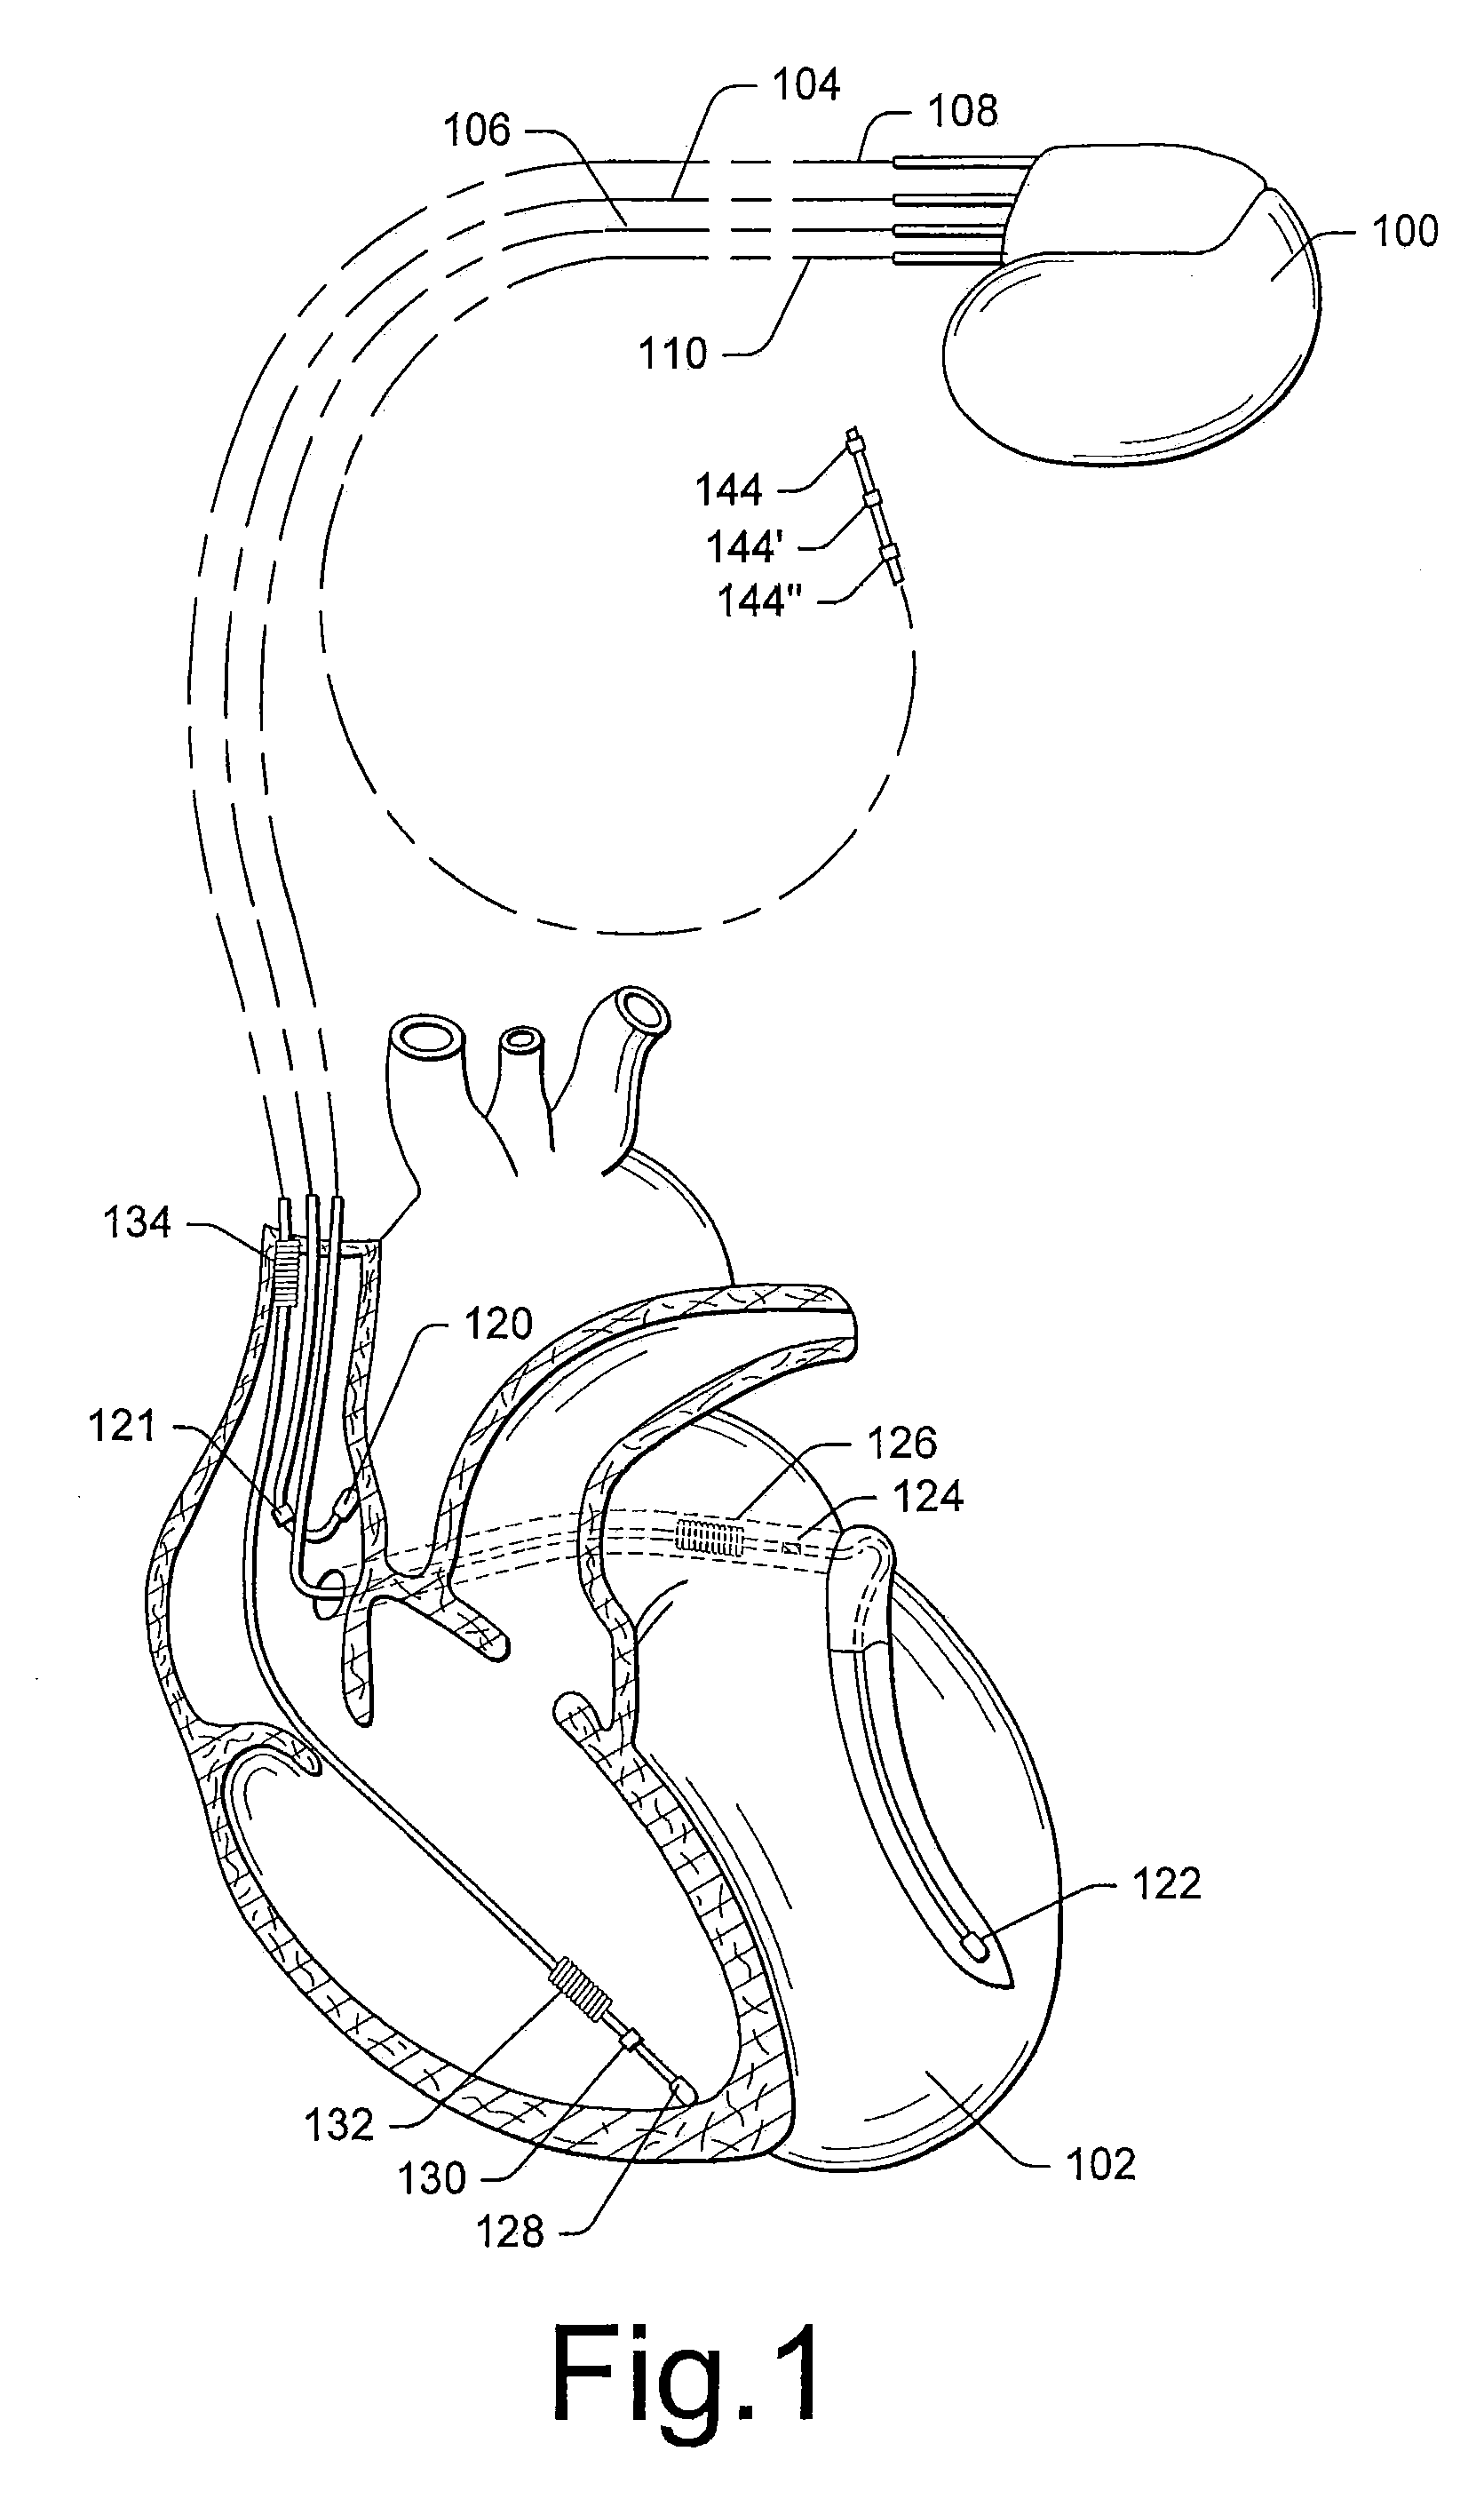 Systems and methods for determining inter-atrial conduction delays using multi-pole left ventricular pacing/sensing leads